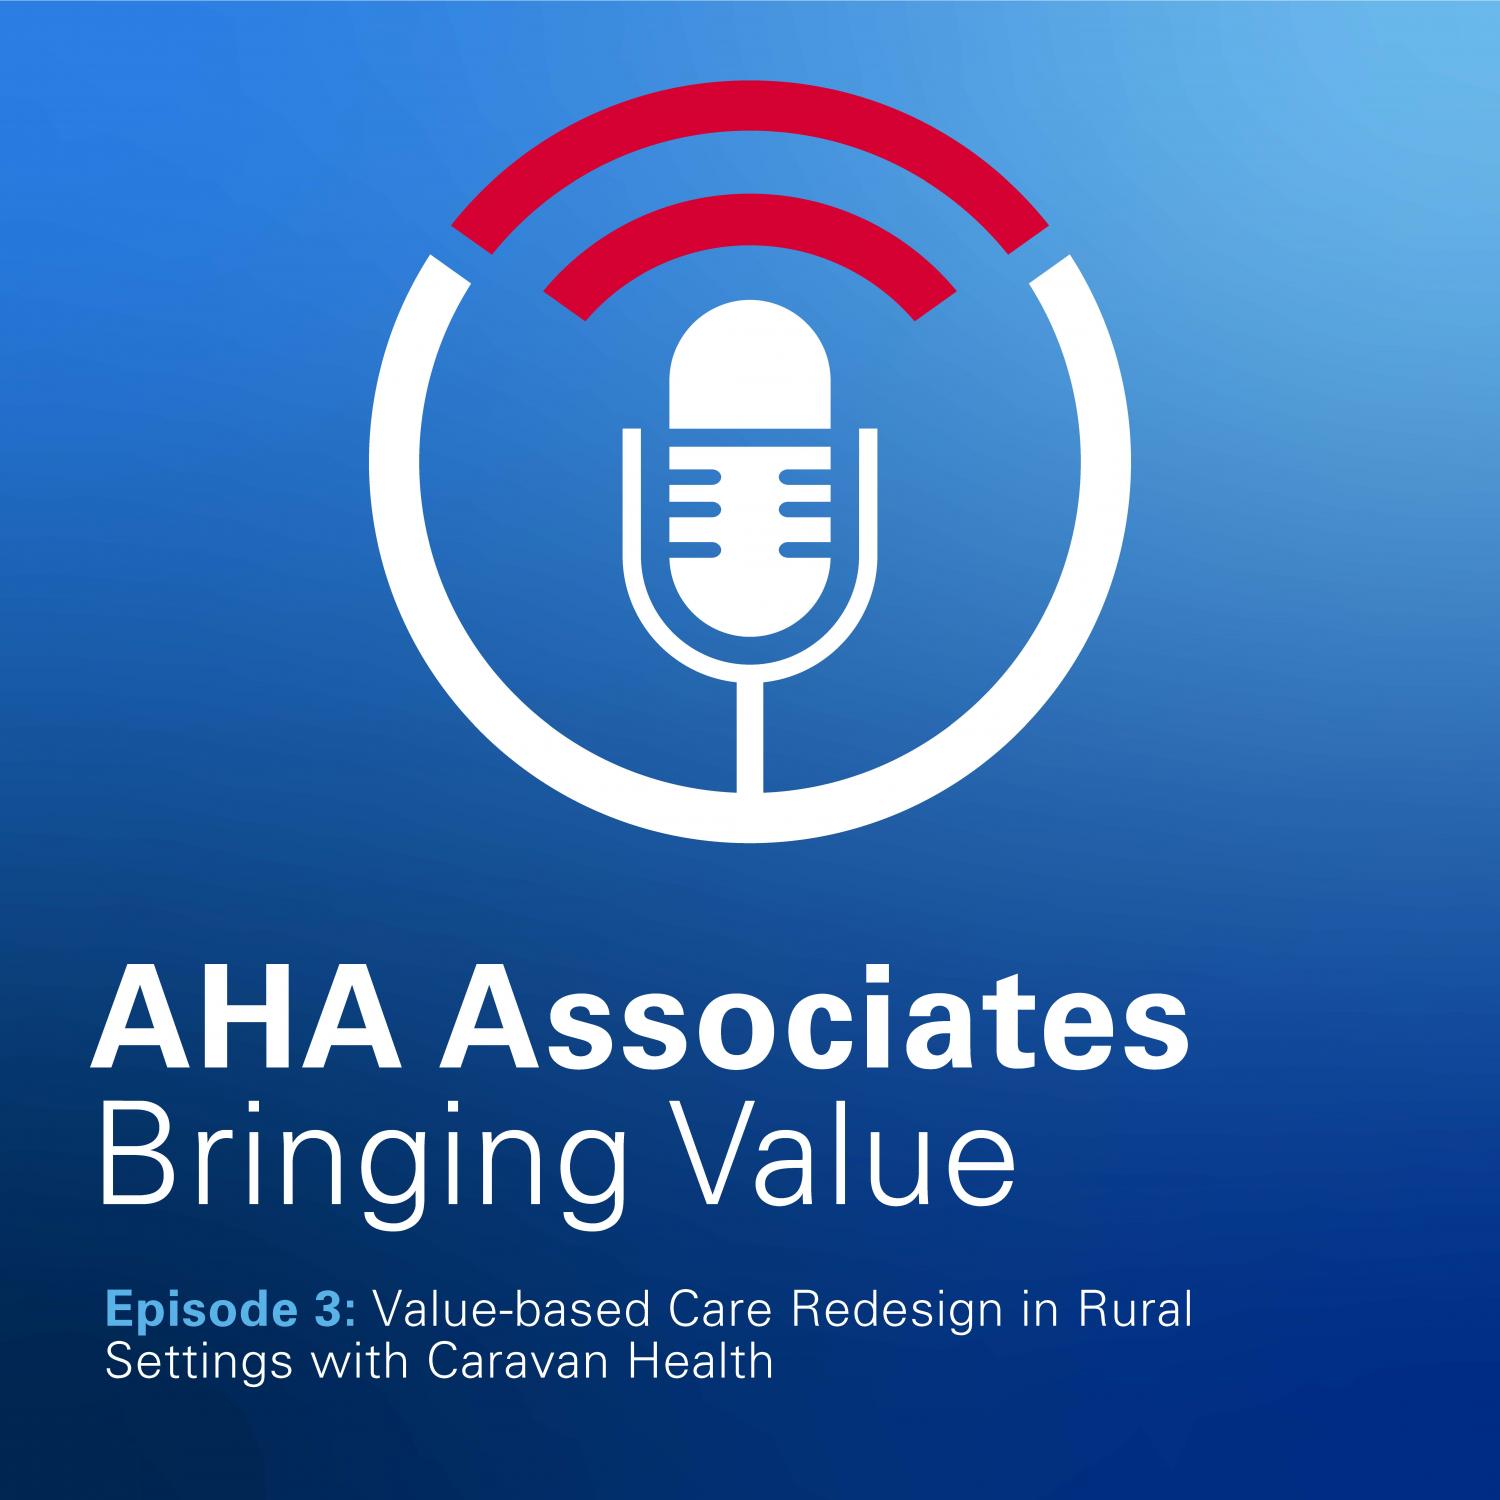 AHA Associates Bringing Value Podcast Episode 3 Value-based care redesign in rural settings with caravan health